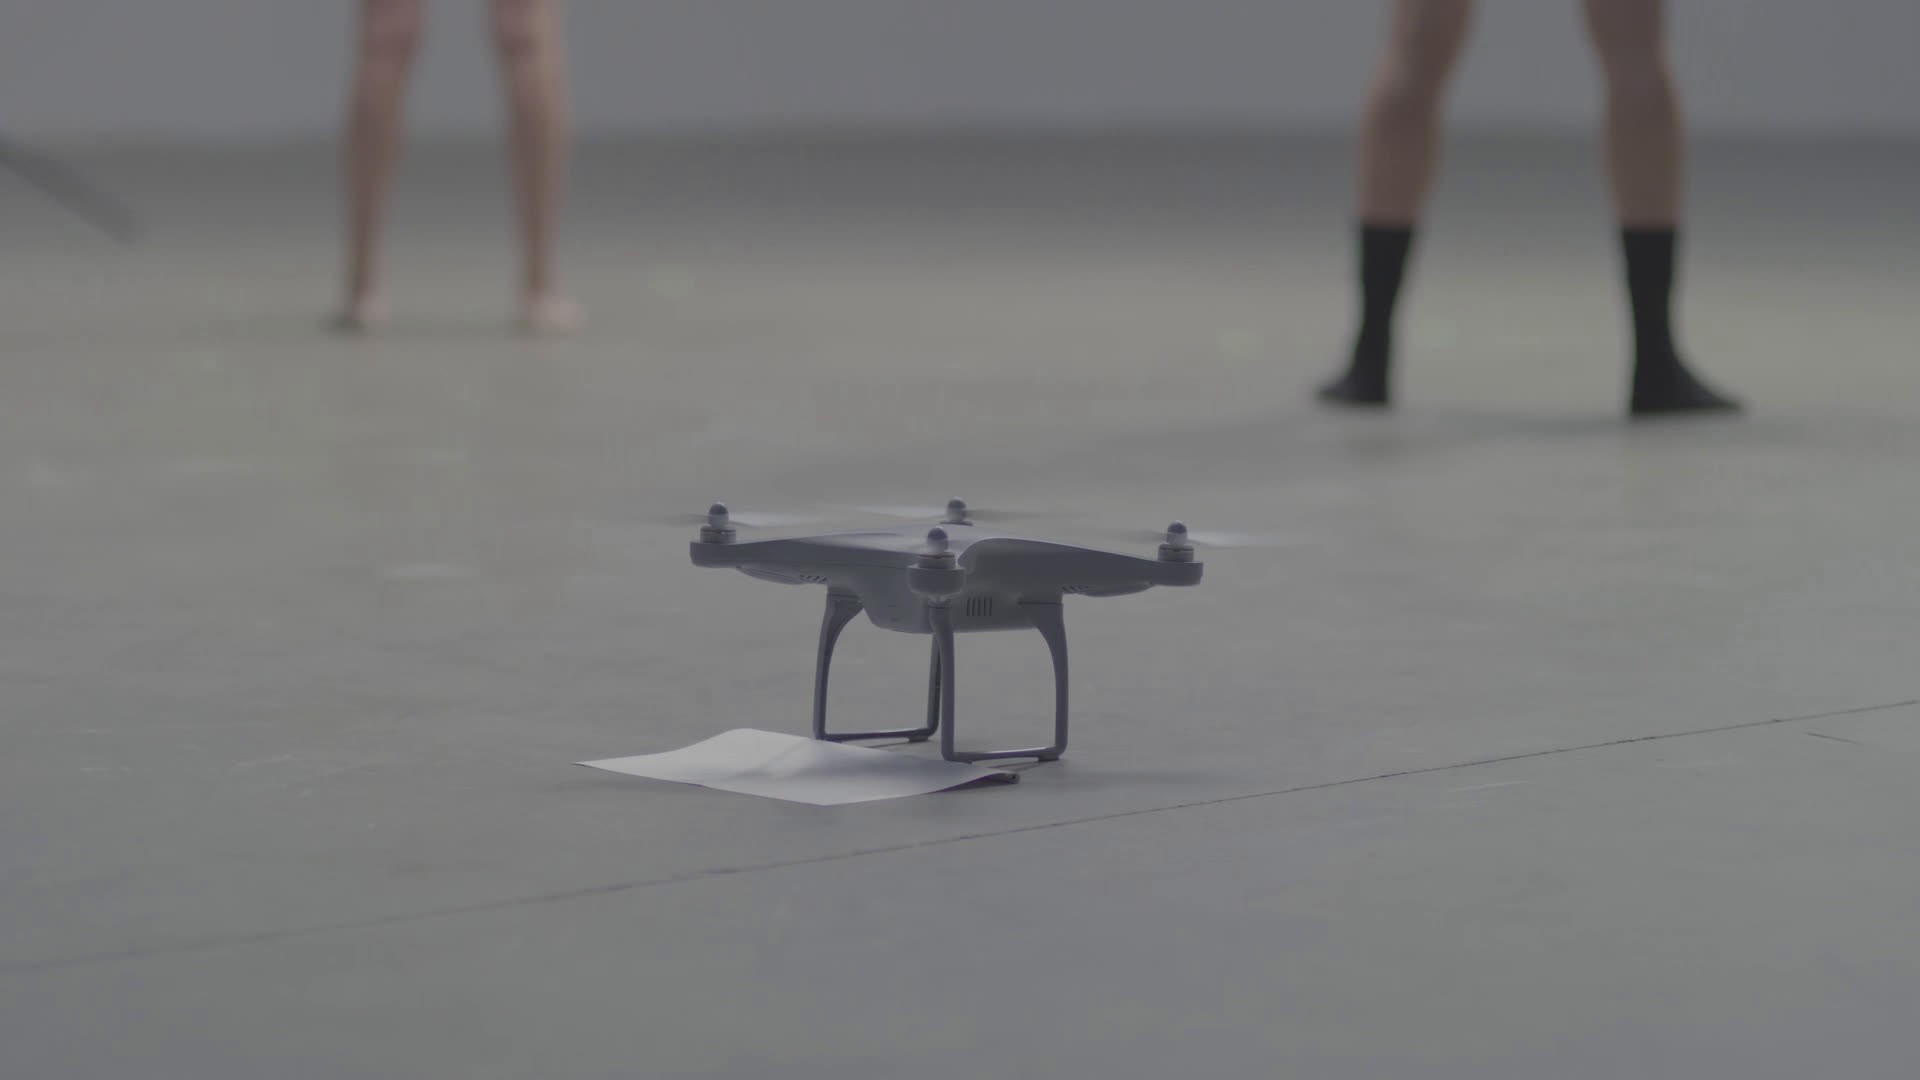 A Kind Drone